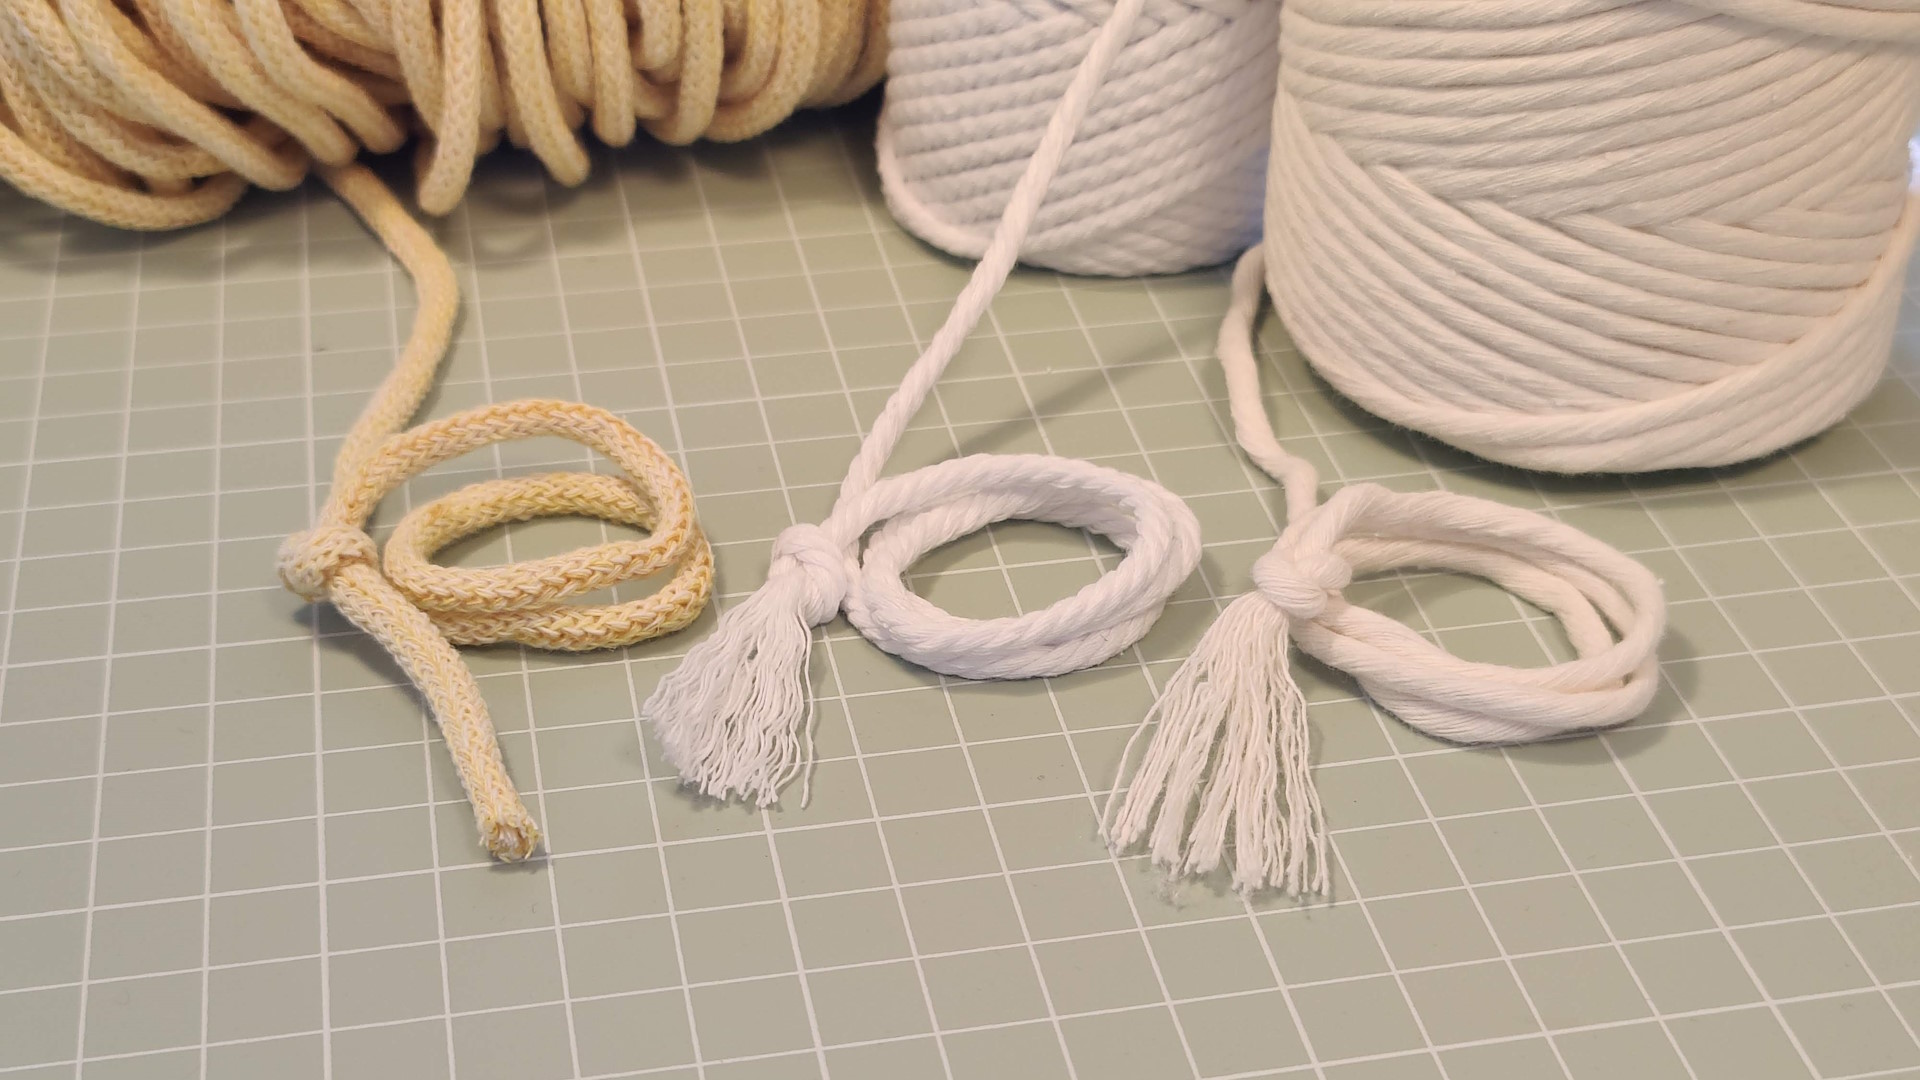 Best macrame cord: Where to buy and how to choose